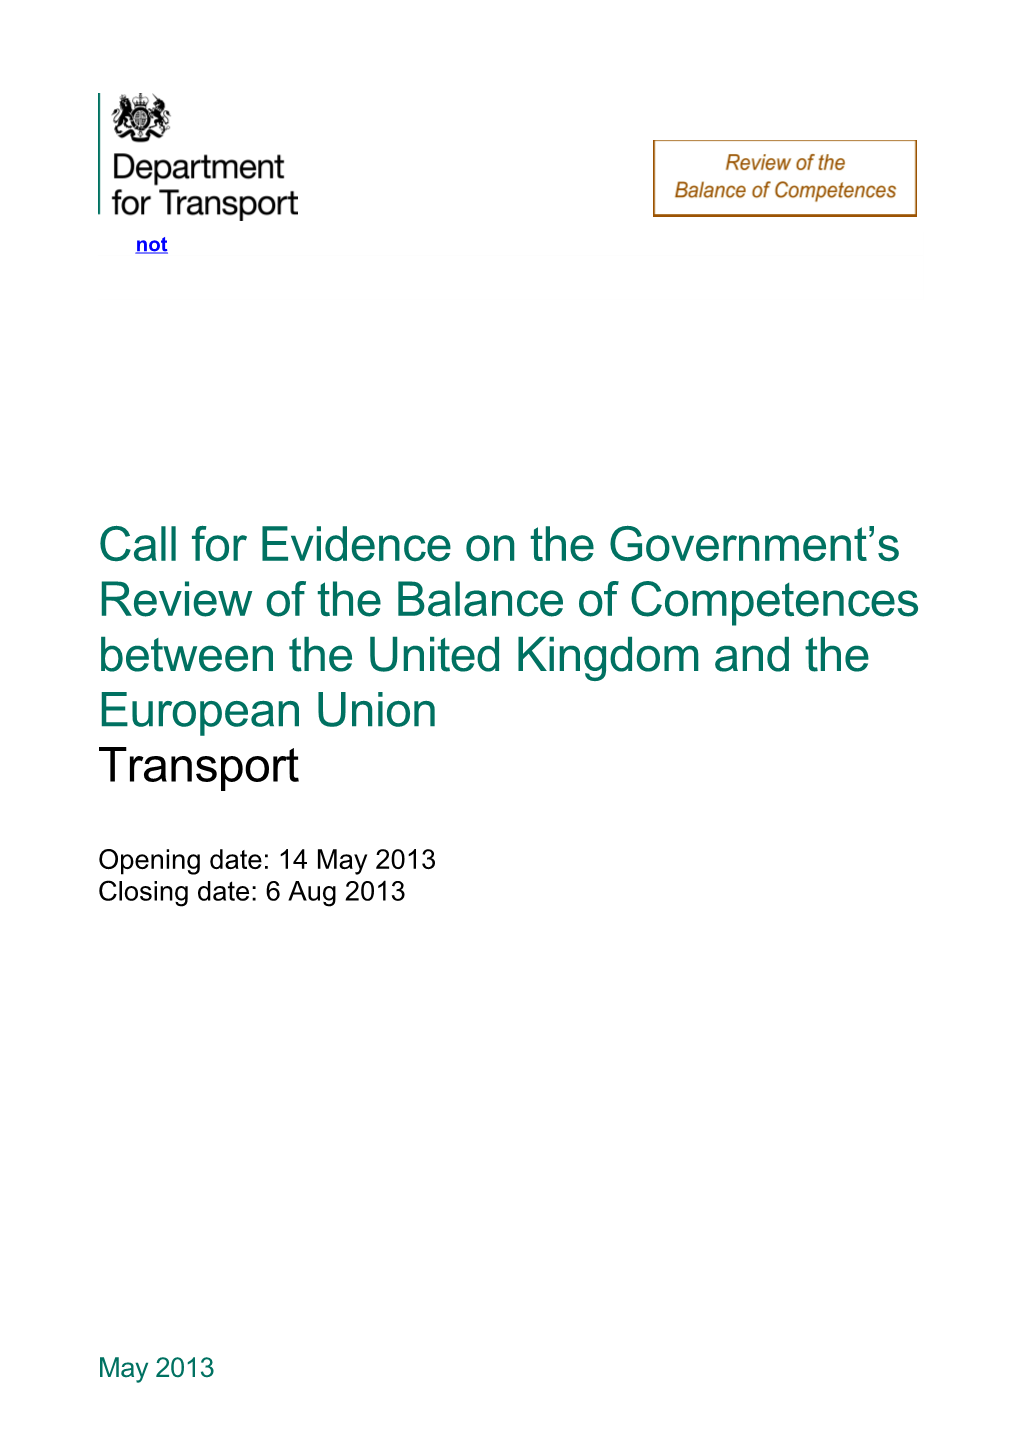 Call for Evidence on the Government S Review of the Balance of Competences Between The